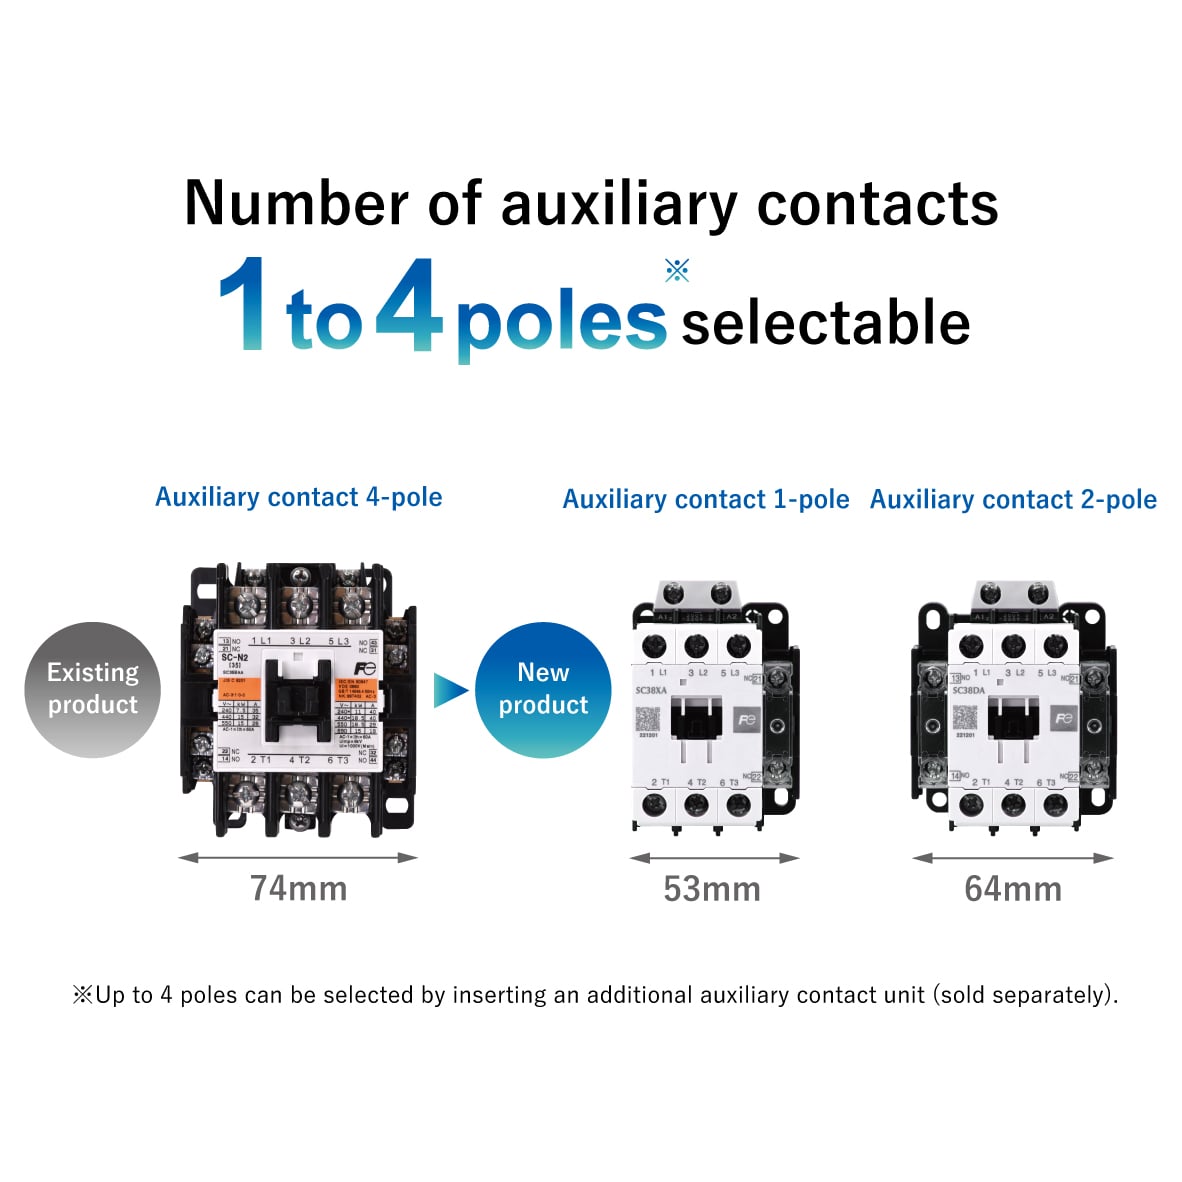 Number of auxiliary contacts 1 to 4 poles selectable